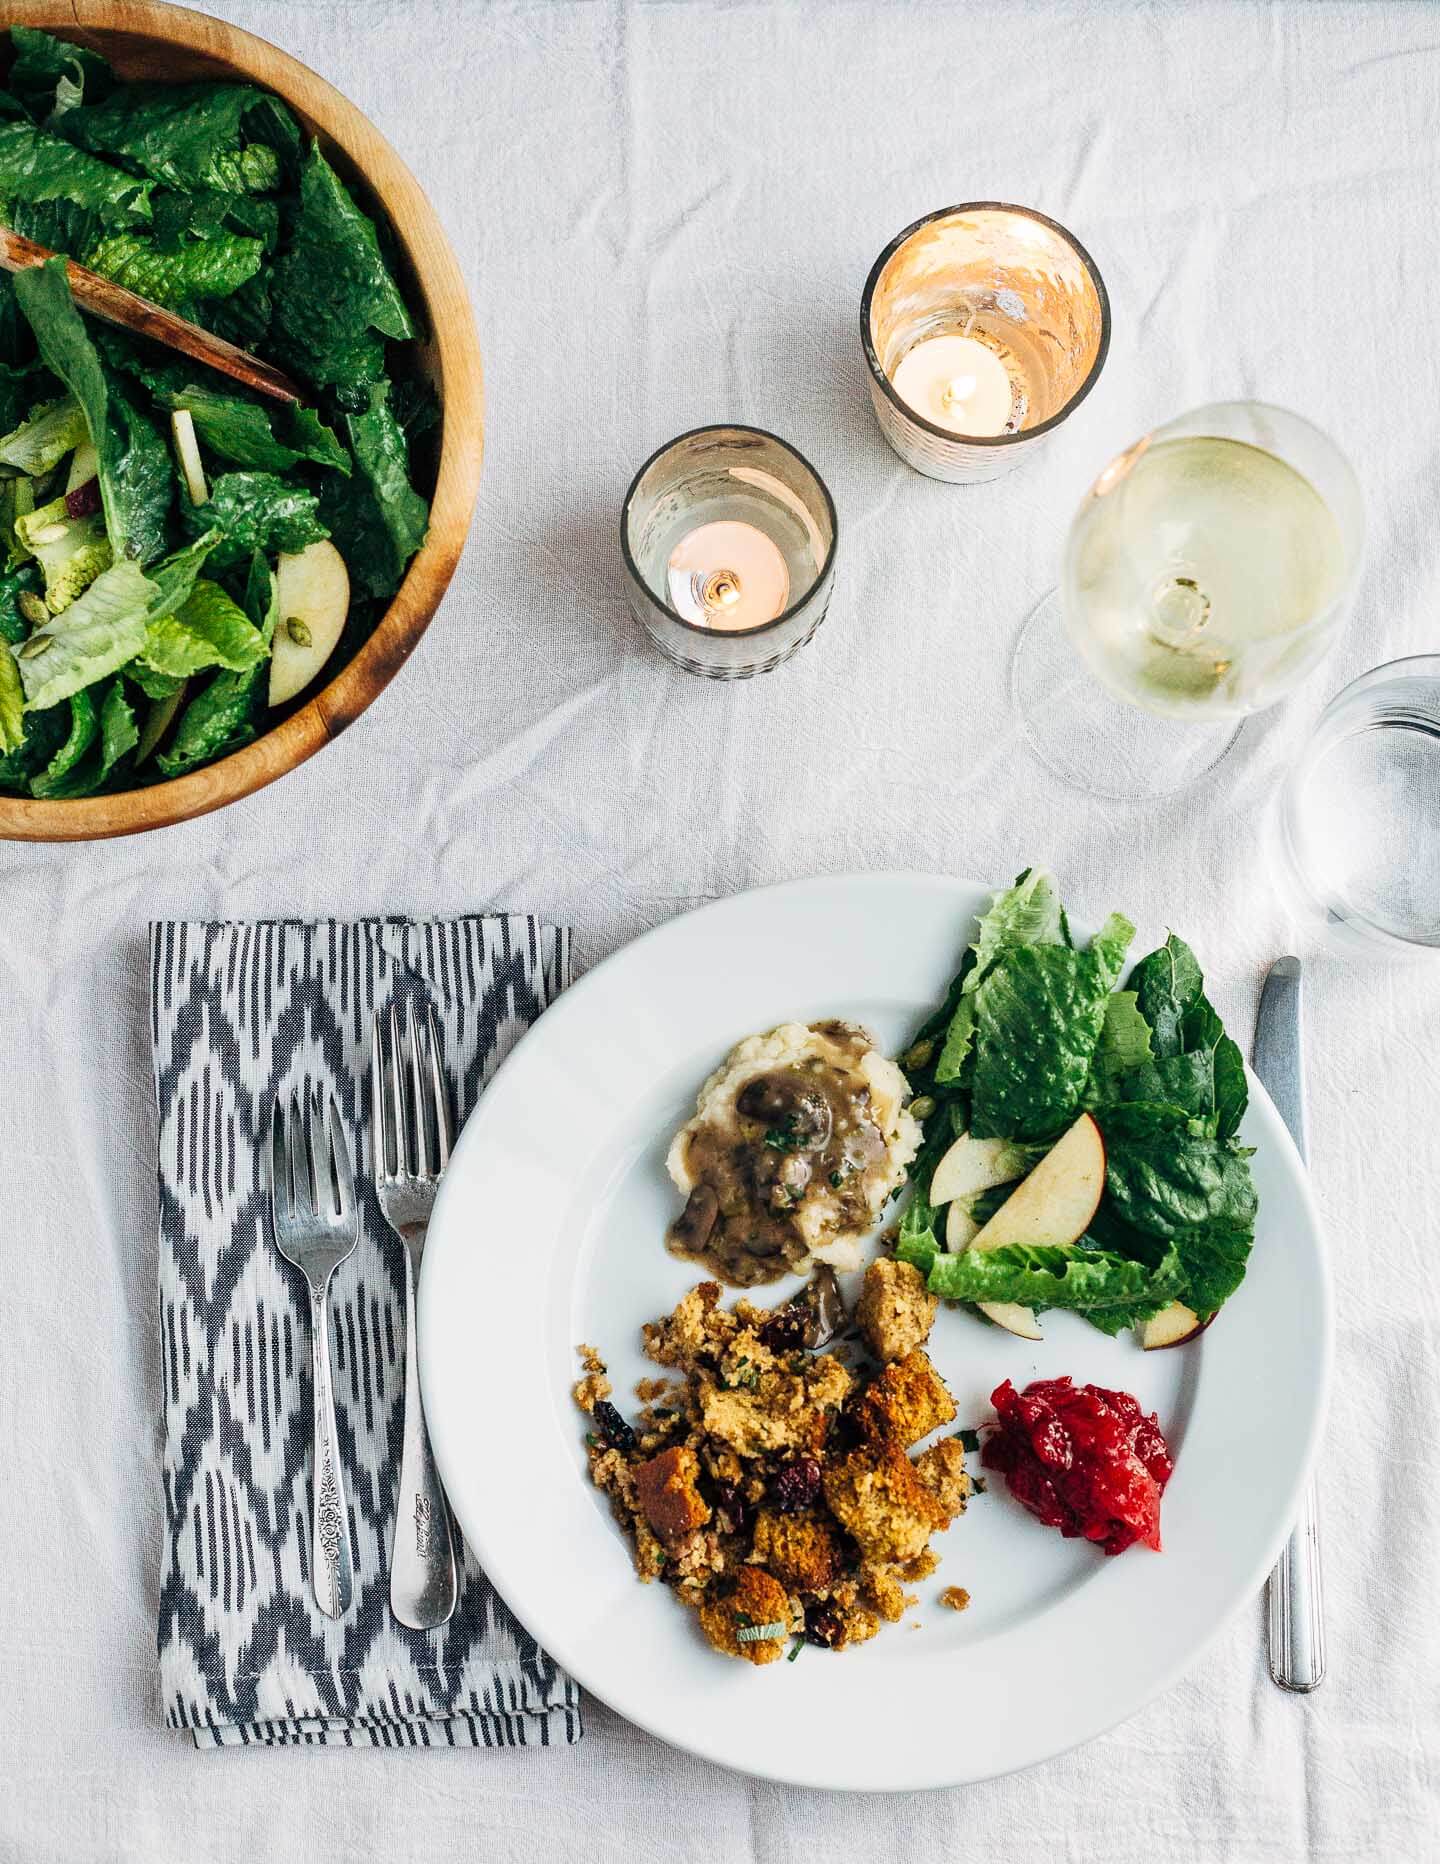 A rich, sating vegetarian Friendsgiving menu and a plant-based, gluten-free recipe for wild rice and cornbread stuffing.